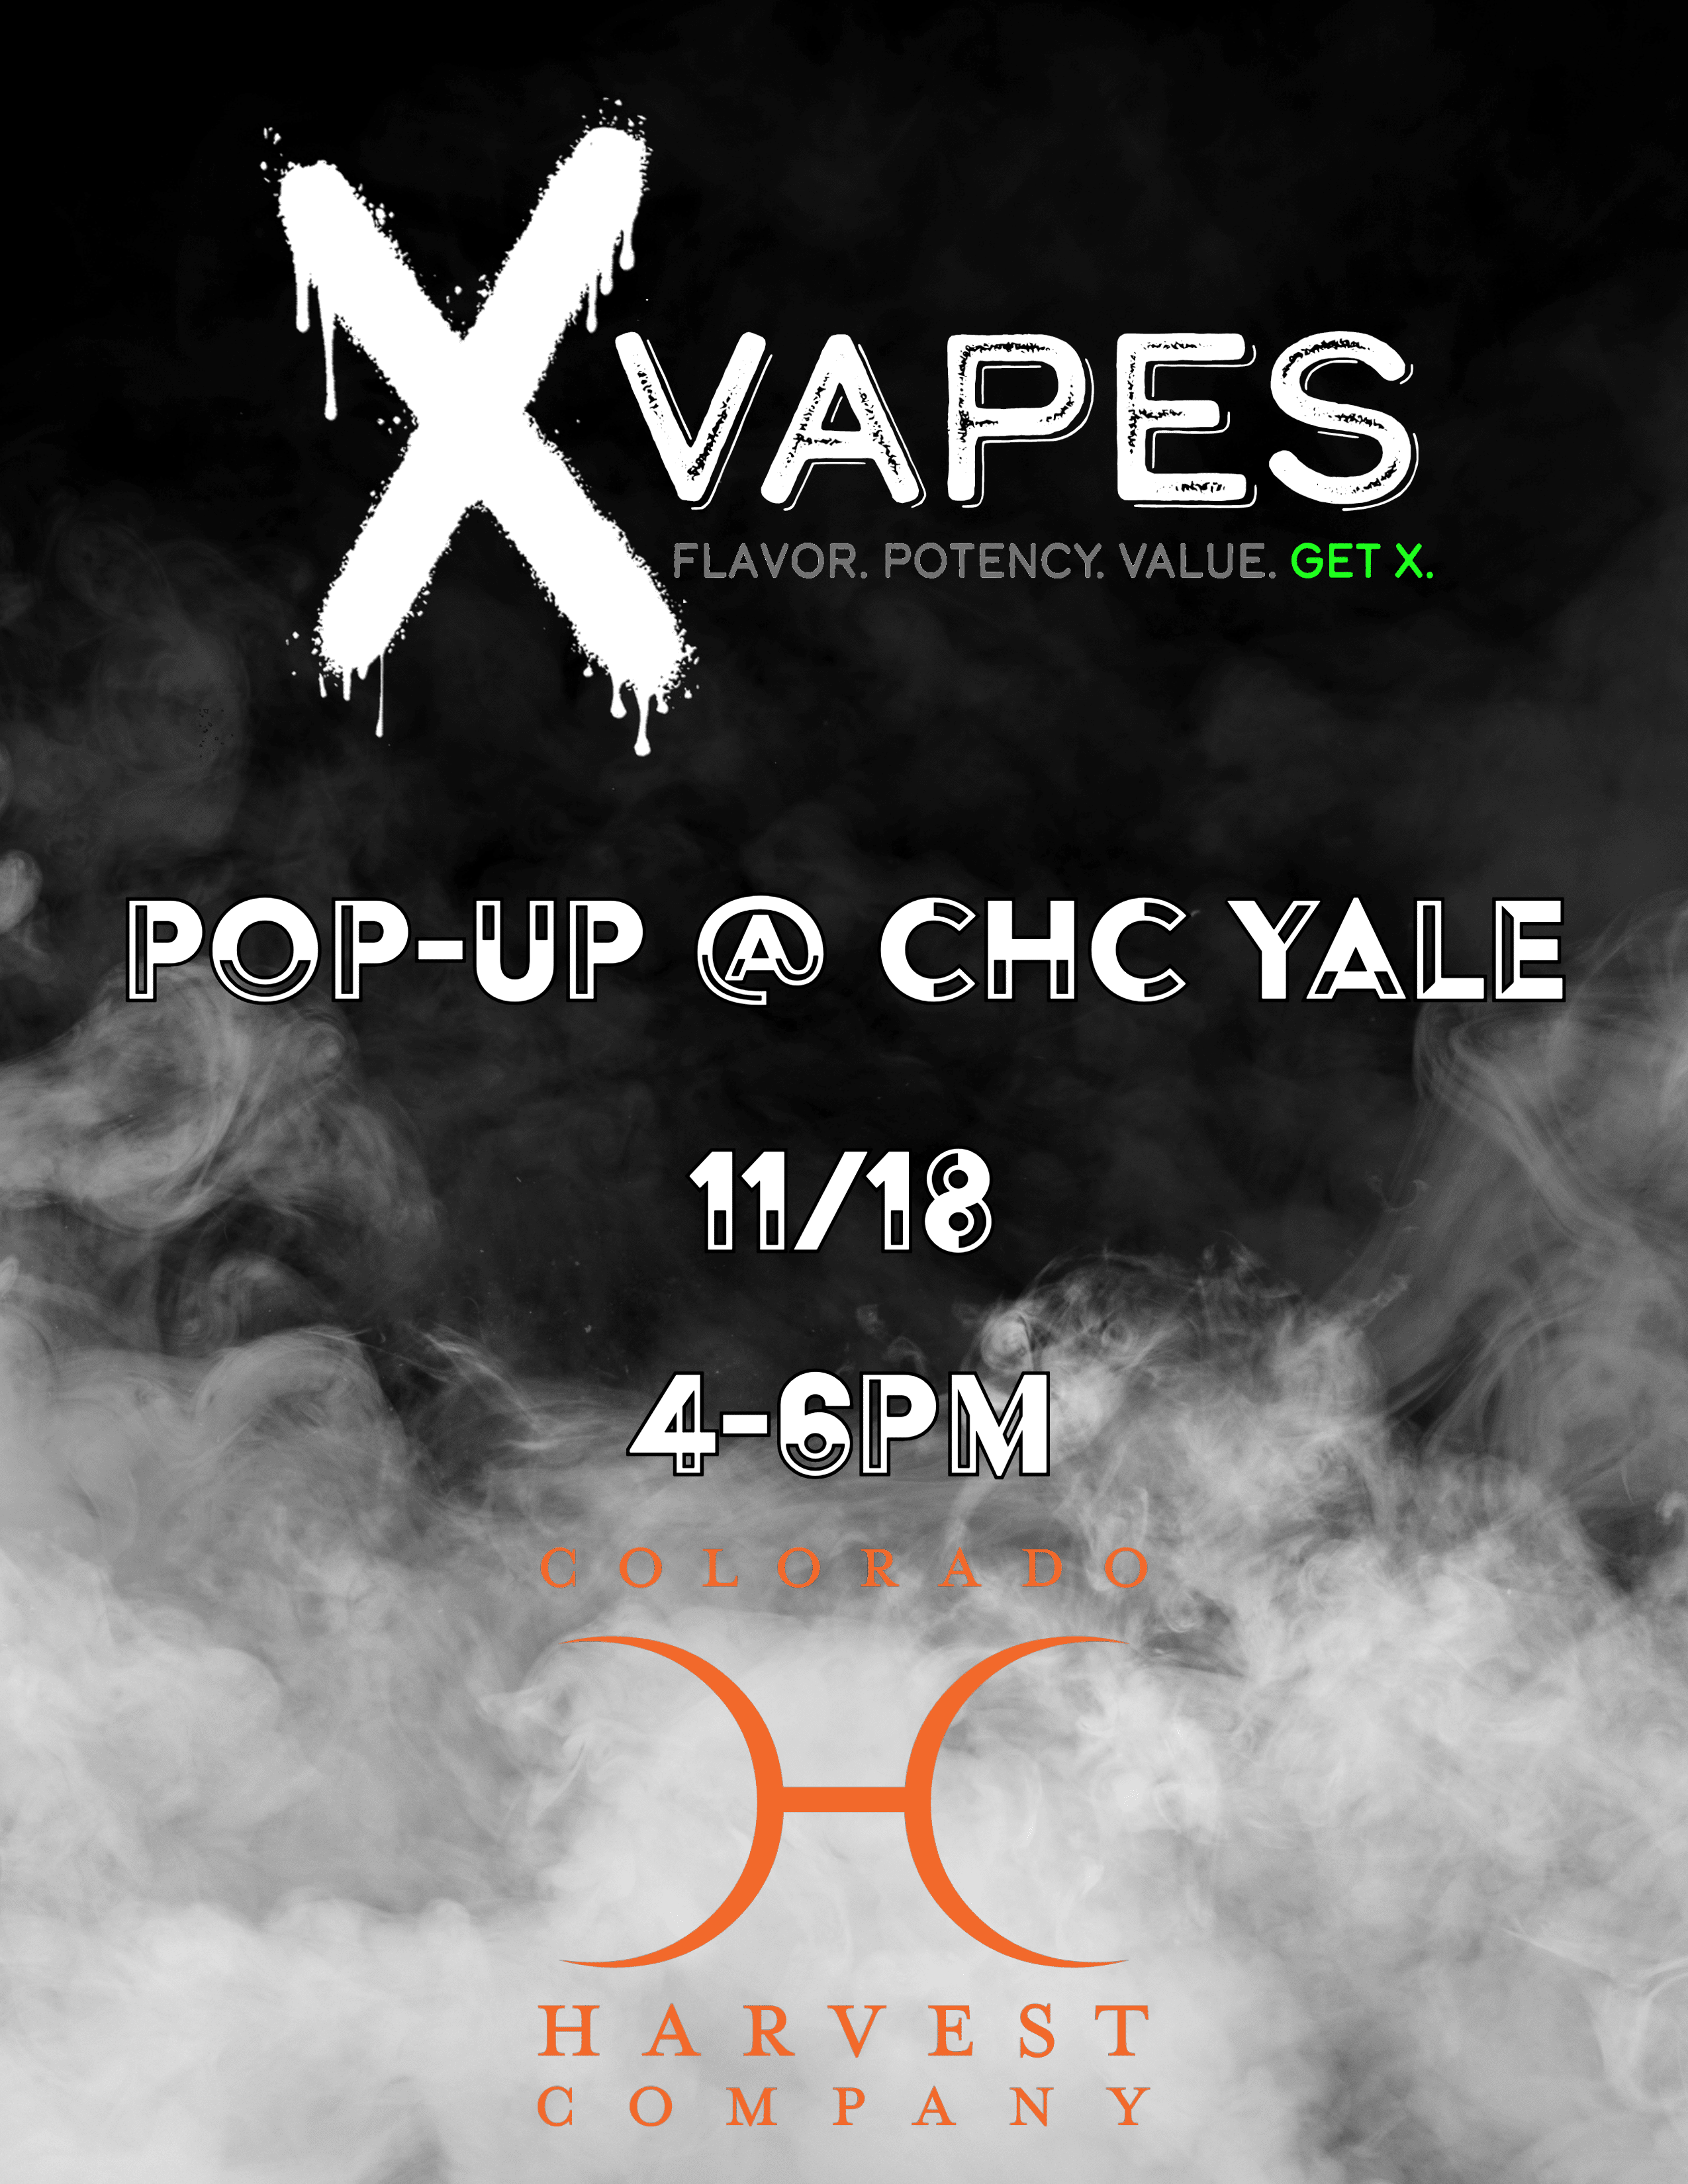 X Vapes Pop-up at Colorado Harvest Company Yale Location on 11.17 from 4-6pm. Get a penny X Vapes battery with purchase.